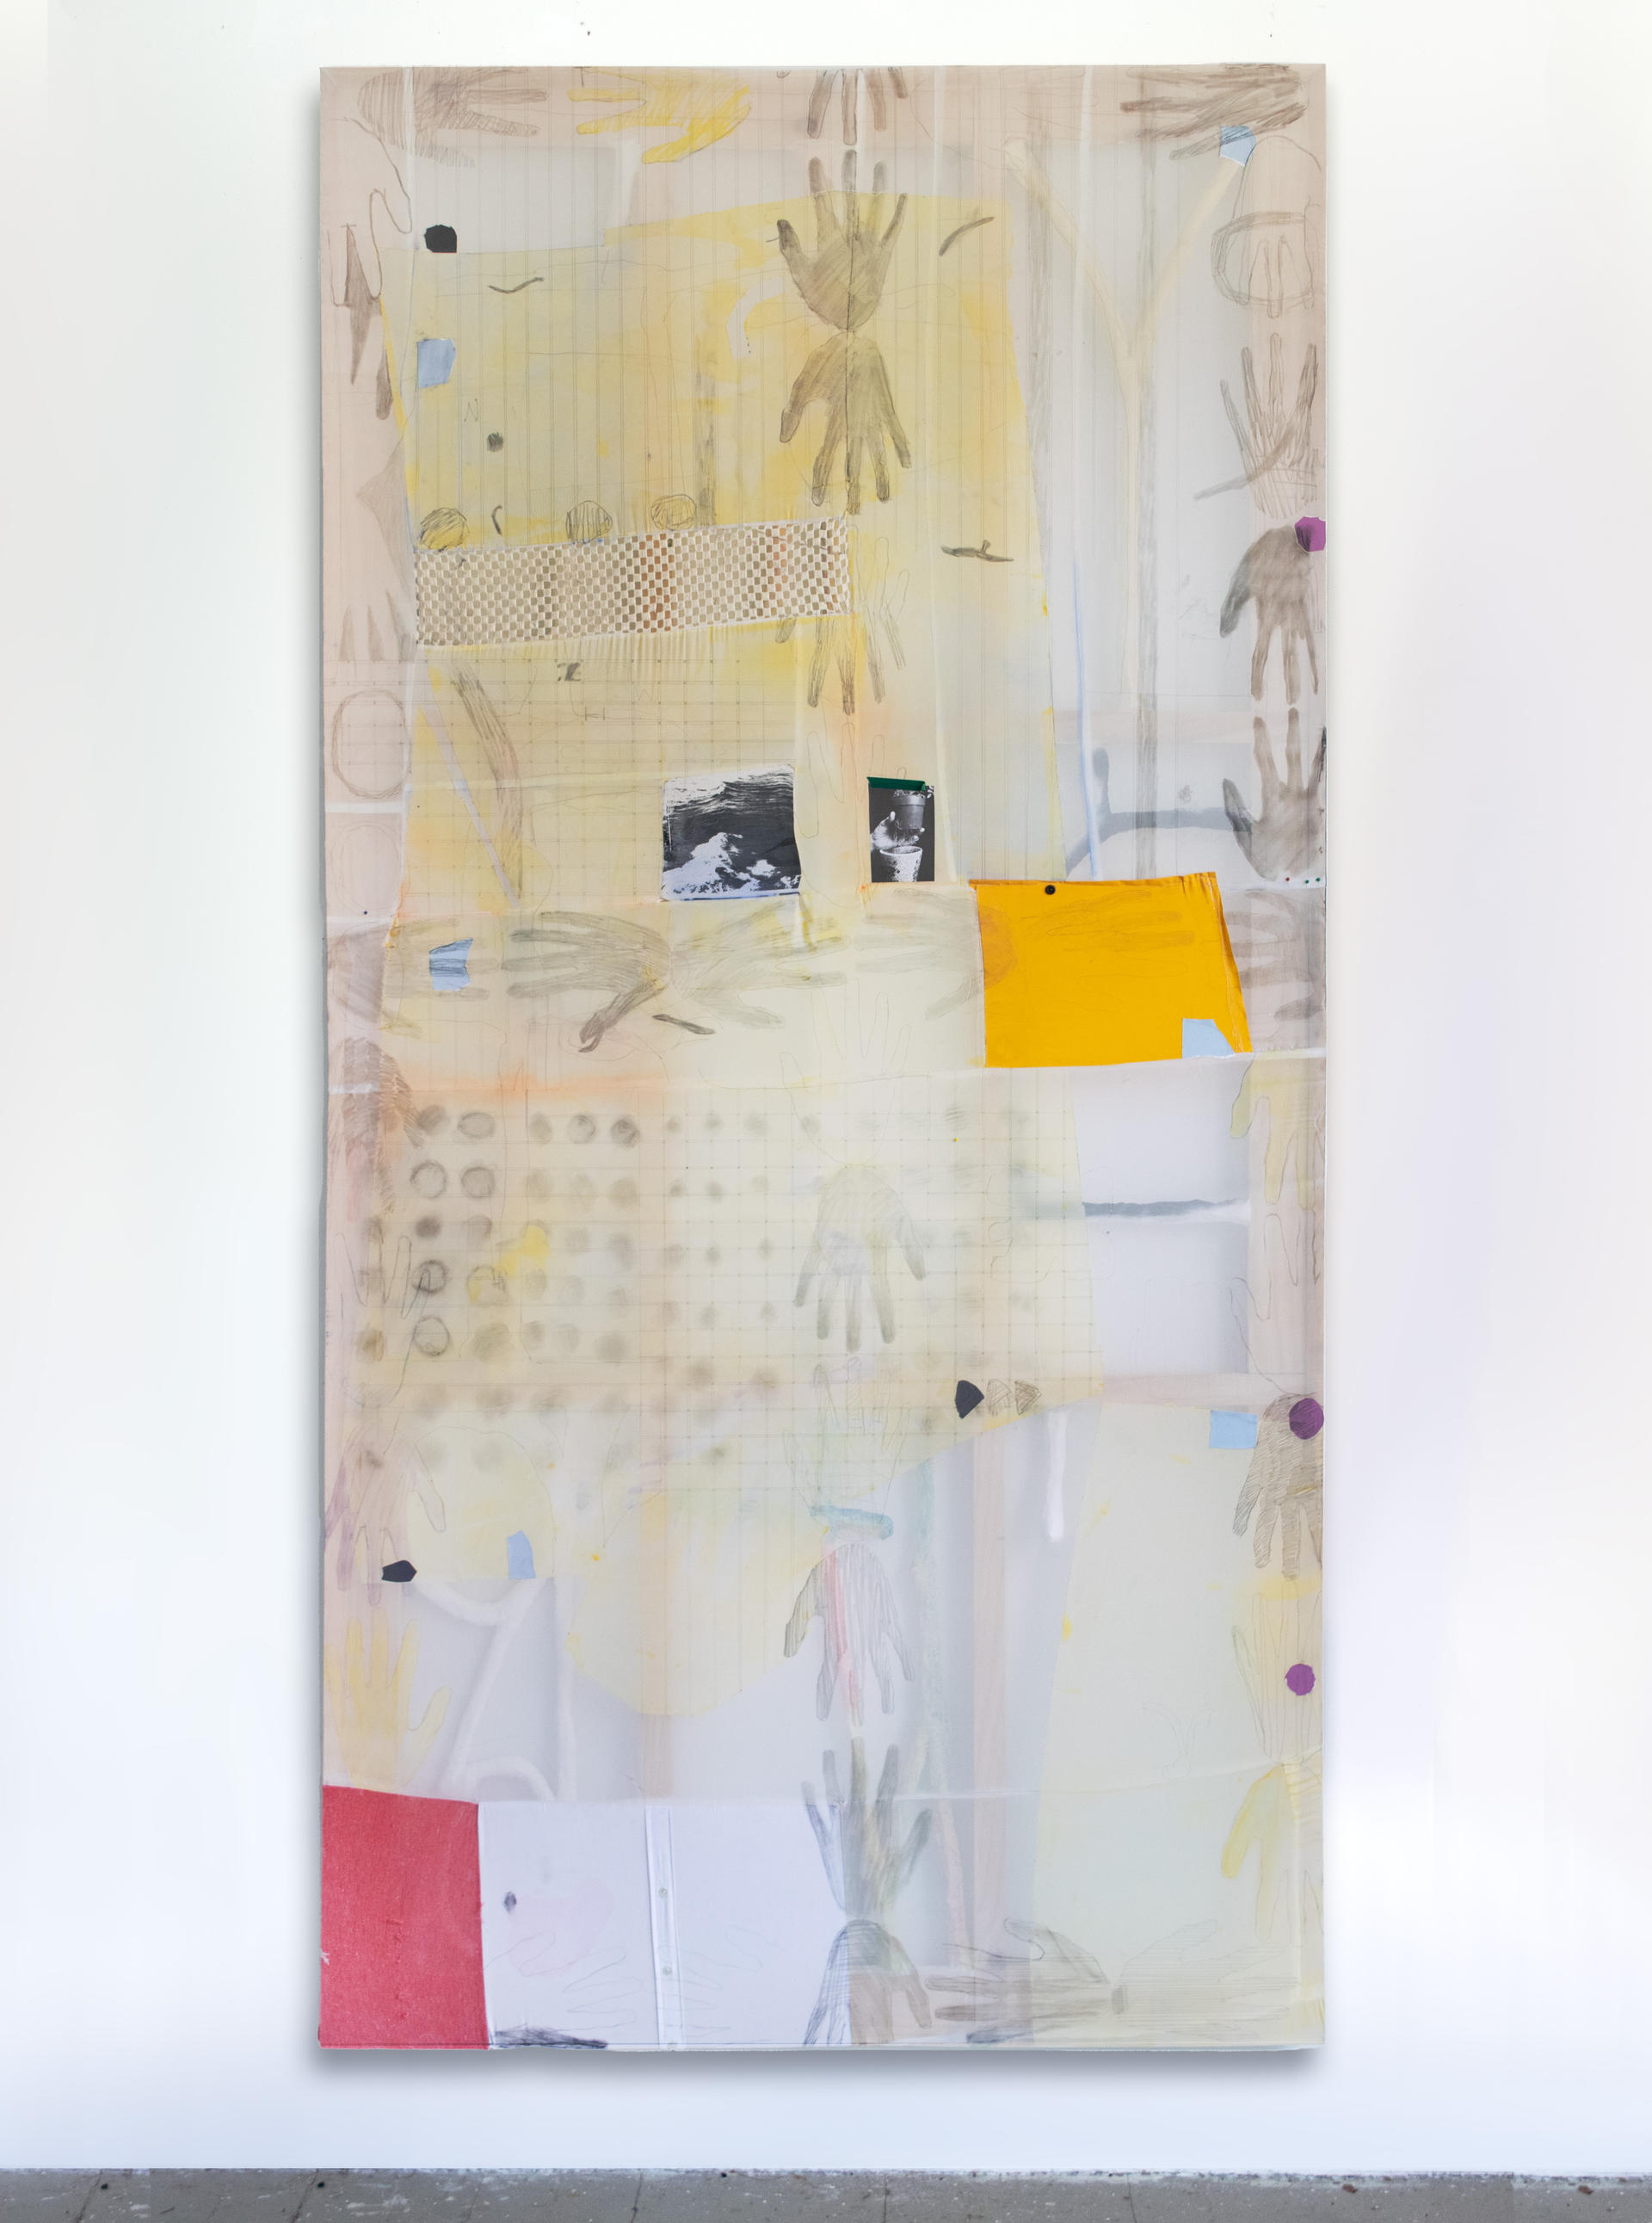 a large painting with a transparent surface and interior sculptural forms